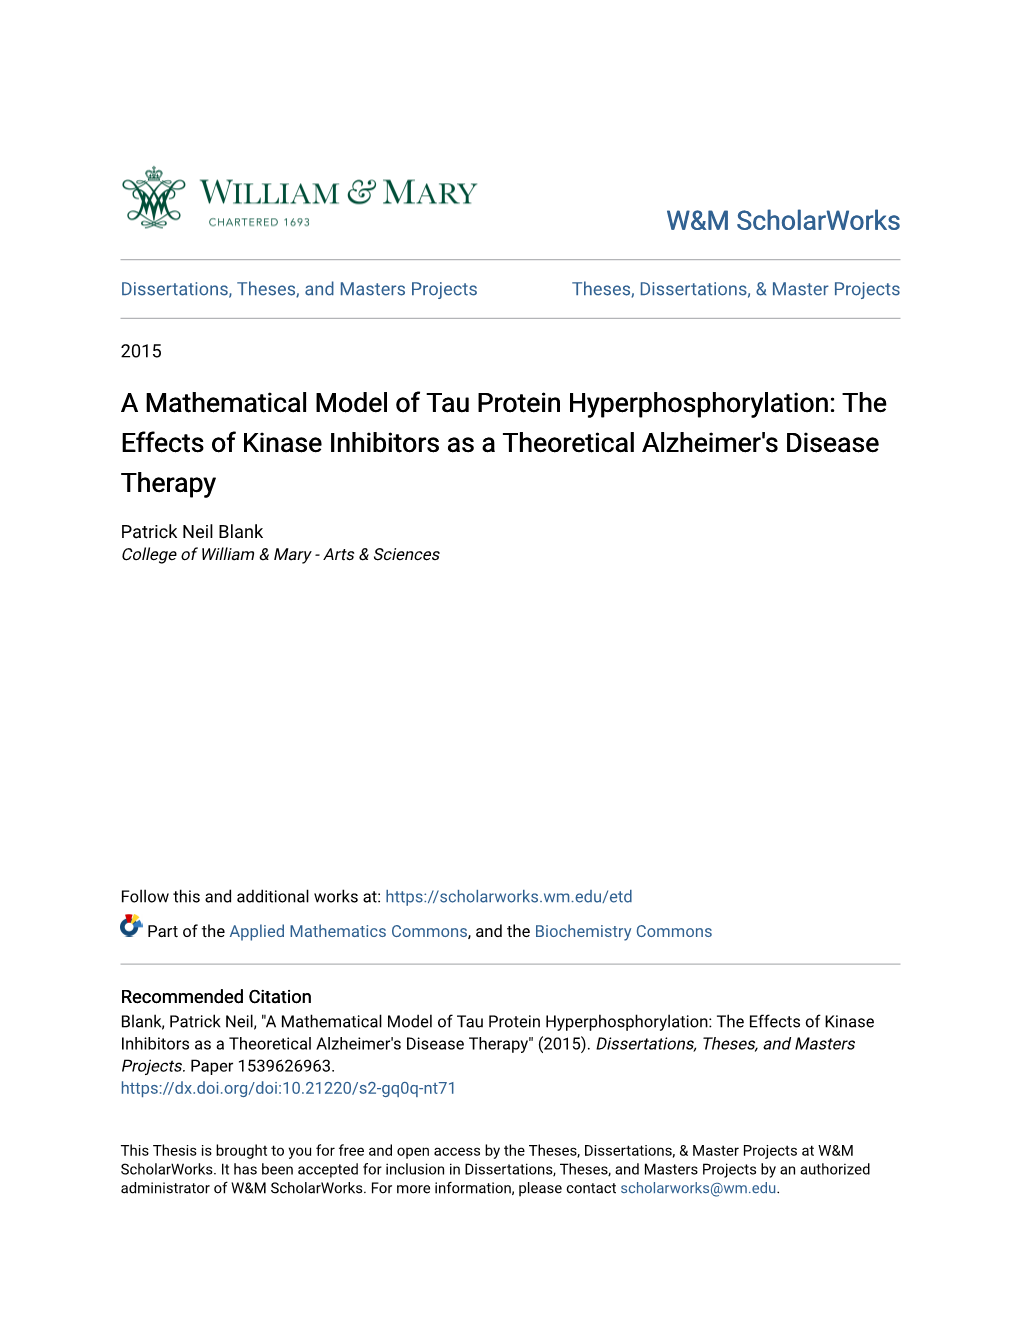 A Mathematical Model of Tau Protein Hyperphosphorylation: the Effects of Kinase Inhibitors As a Theoretical Alzheimer's Disease Therapy